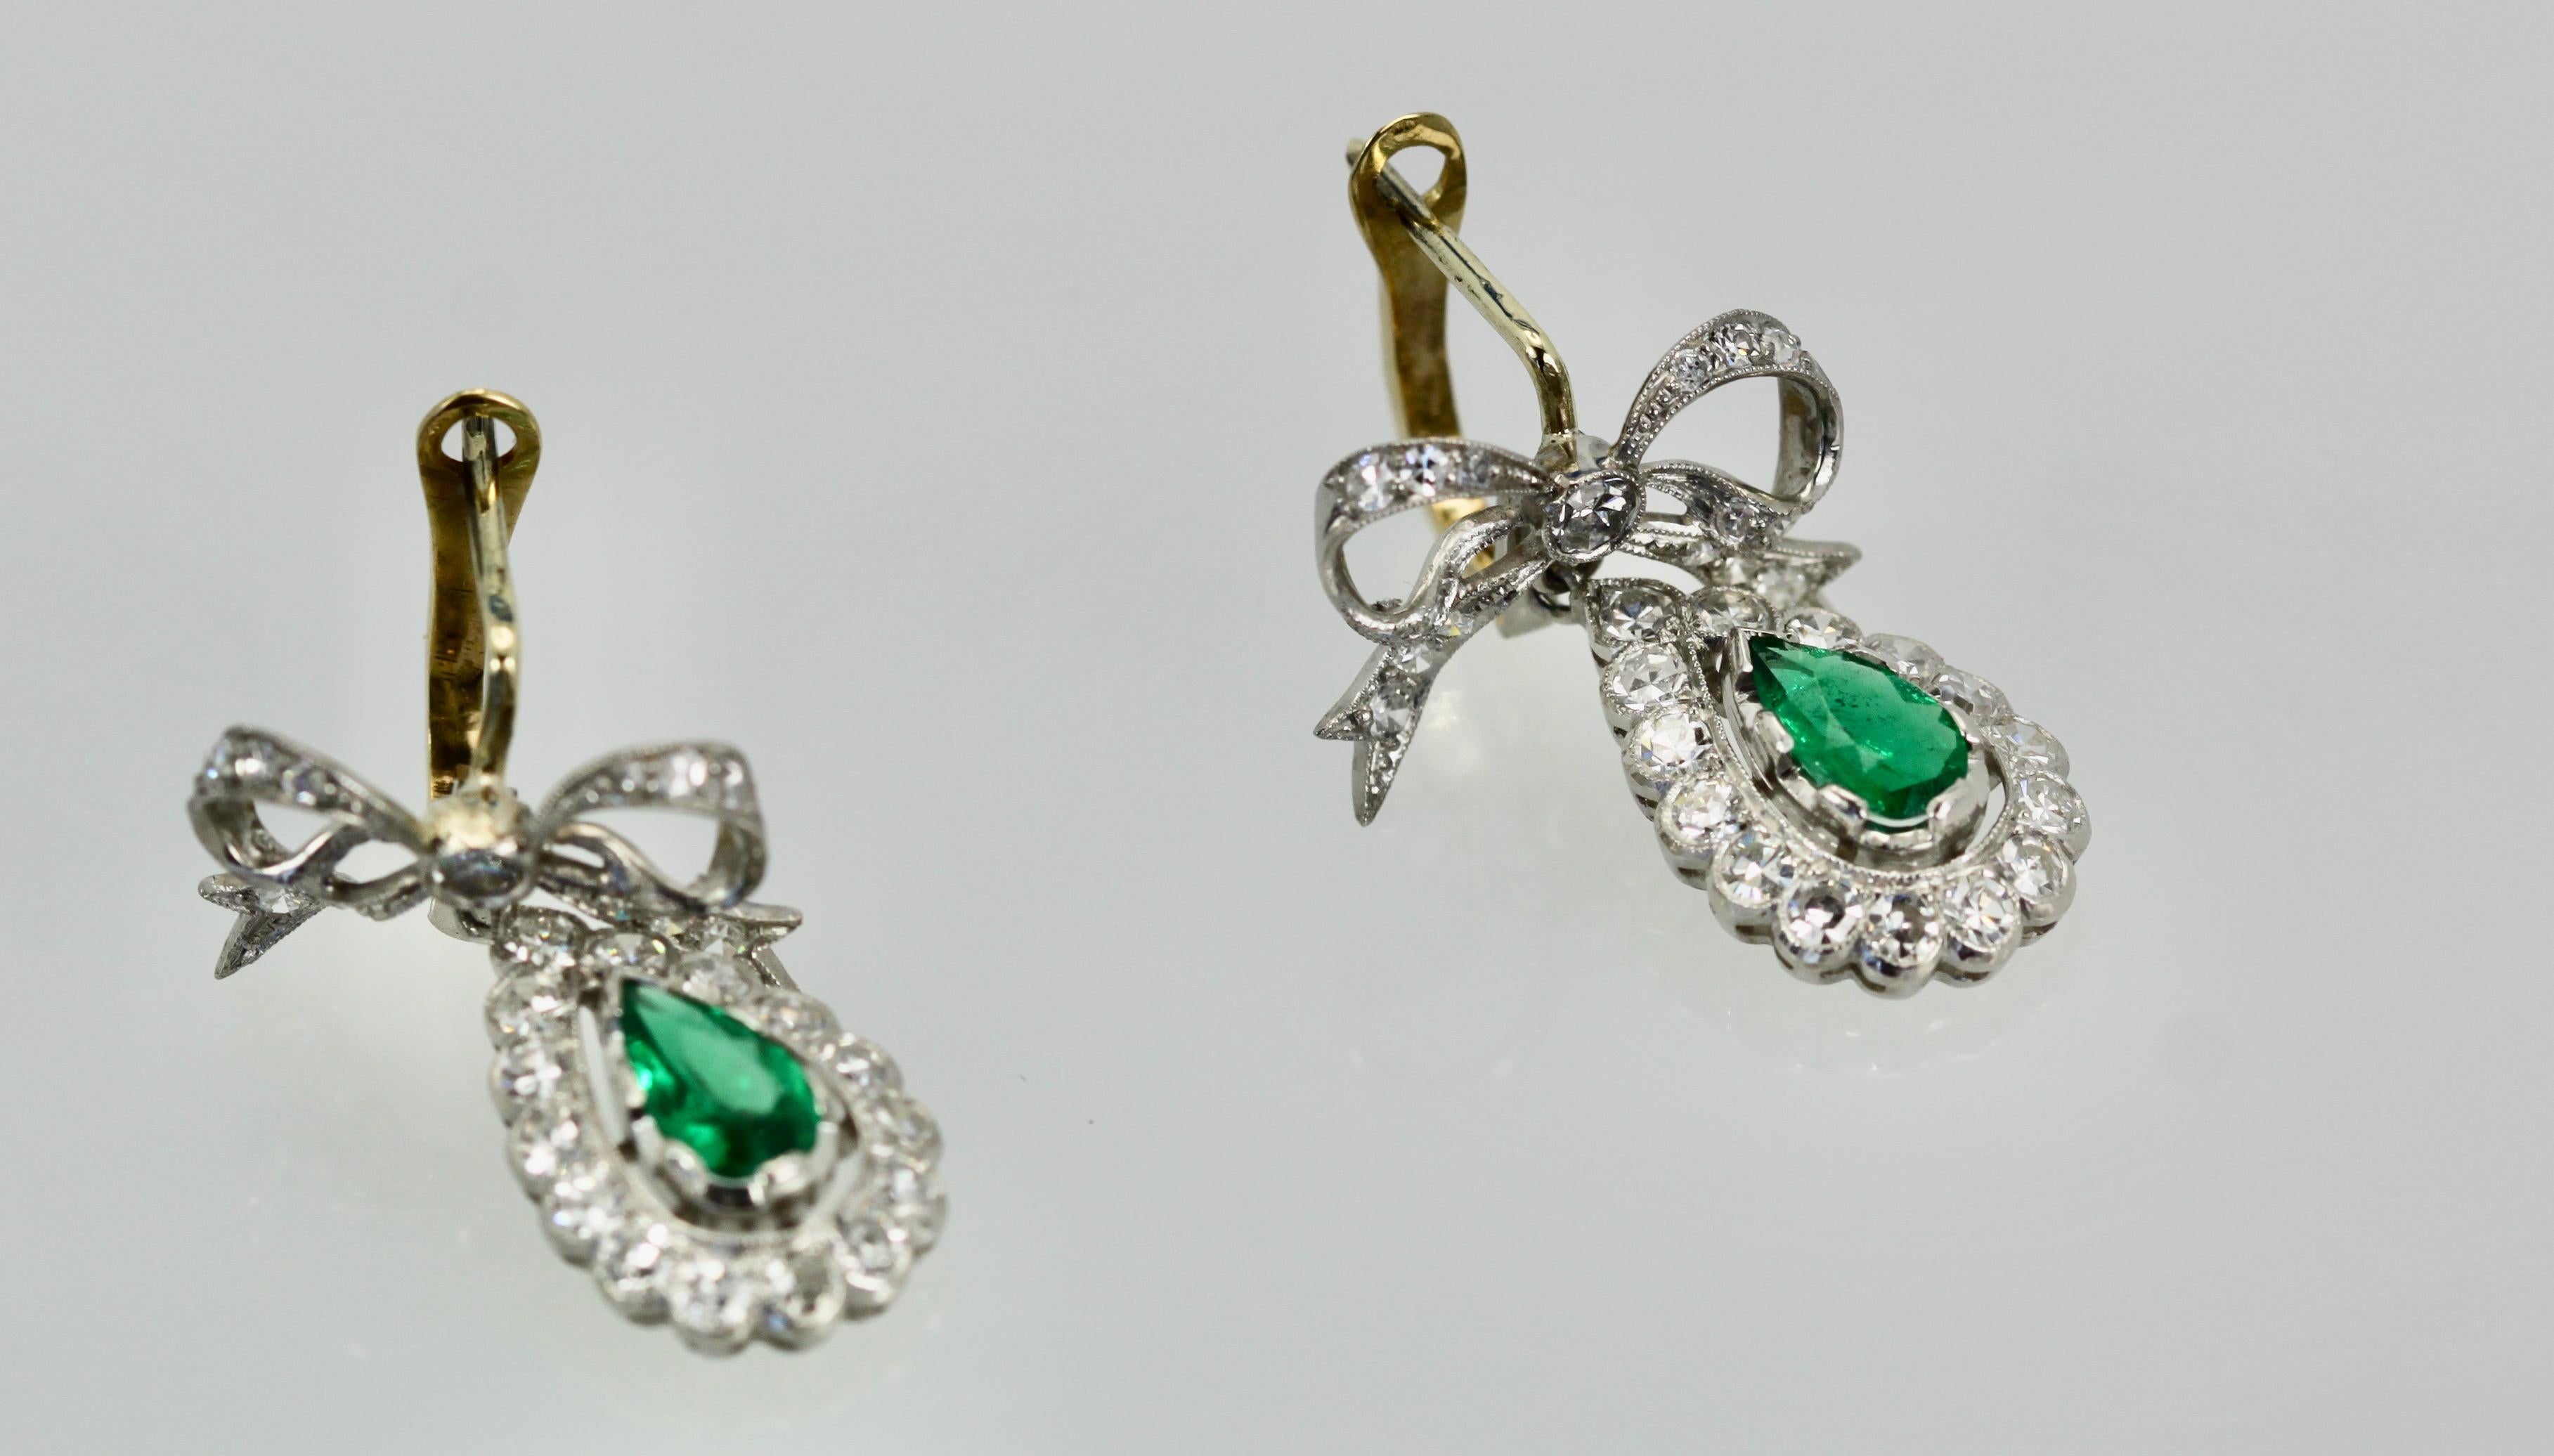 These platinum Earrings hold a beautiful Emerald.  They are from the Victorian period with there lovely diamond ribbon top and the surround of the Emerald is all in Diamonds.  These are small earrings and perfect for the petite women, but anyone can